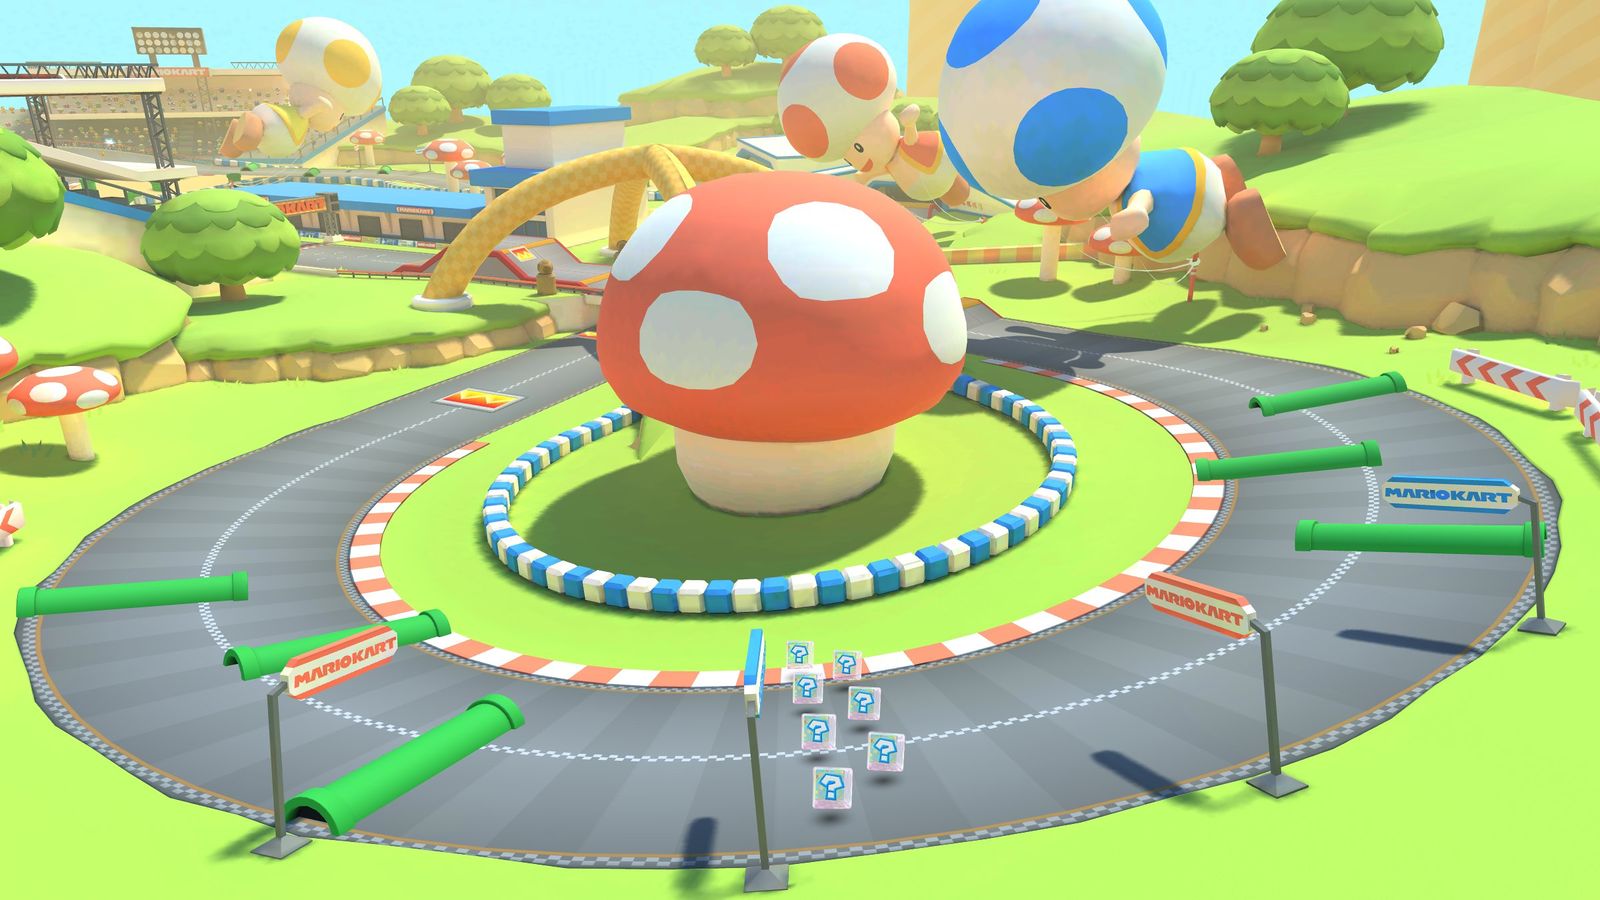 Mario Kart 8 Getting 48 Remade Courses As Dlc 2499 Or Included With Nso Expansion Pass 9829